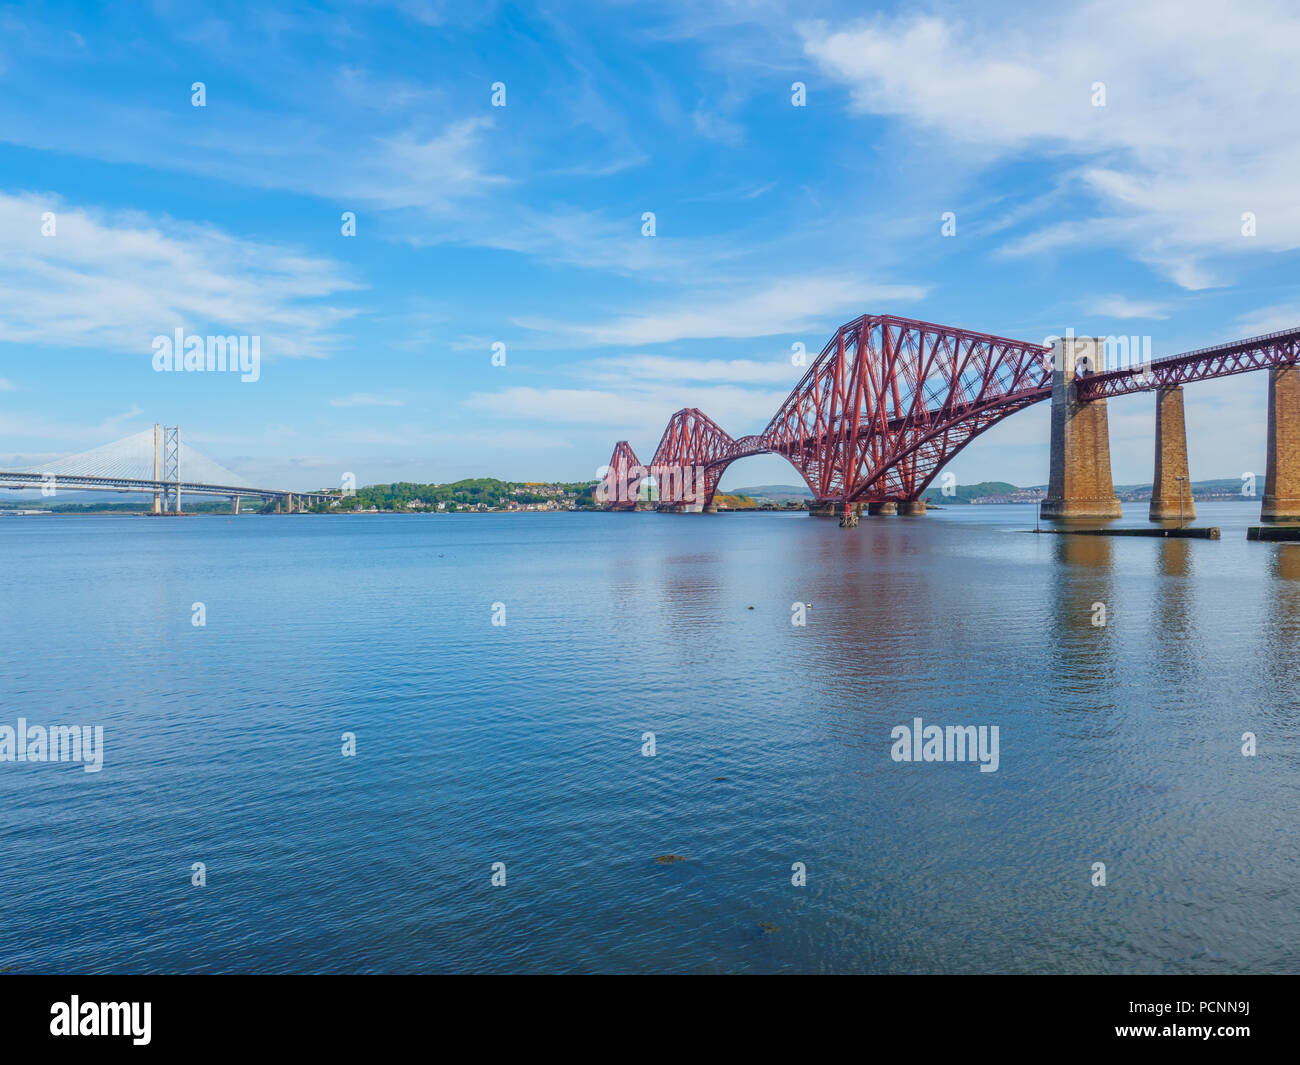 View of the iconic Forth Rail Bridge over the Firth of Forth (on the right) with the older Forth Road bridge (on the left) and new Queensferry Crossin Stock Photo